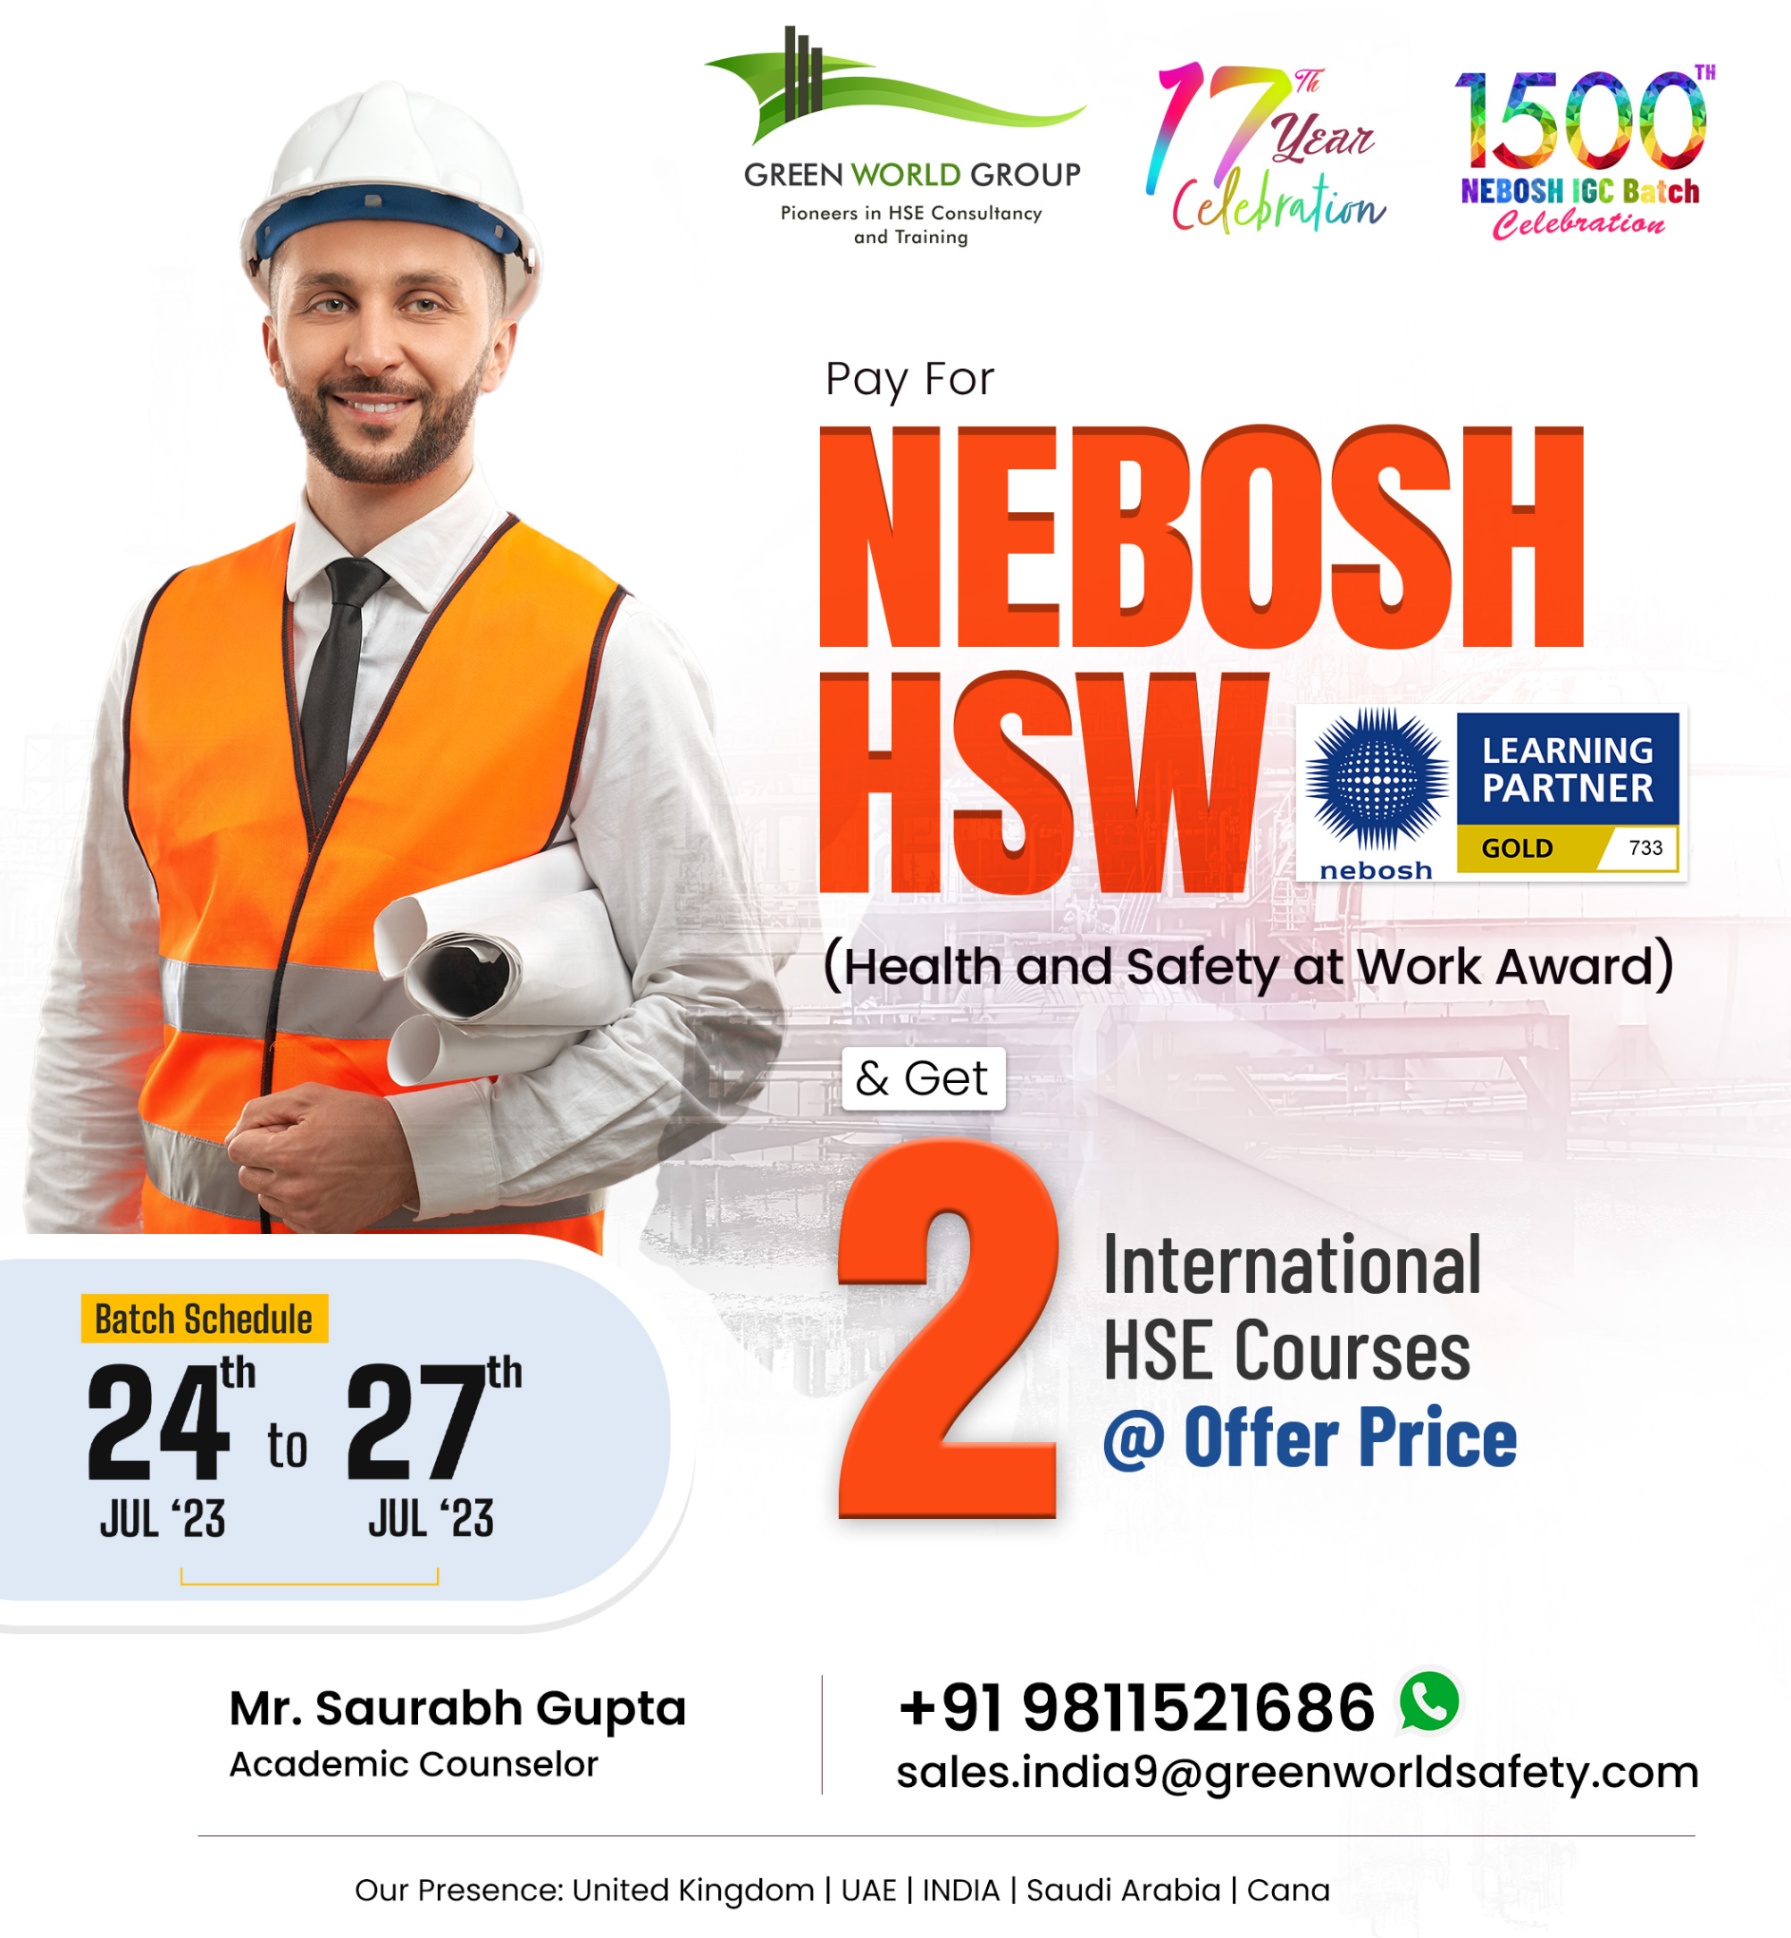 NEBOSH HSW course at a reasonable cost in New Delhi